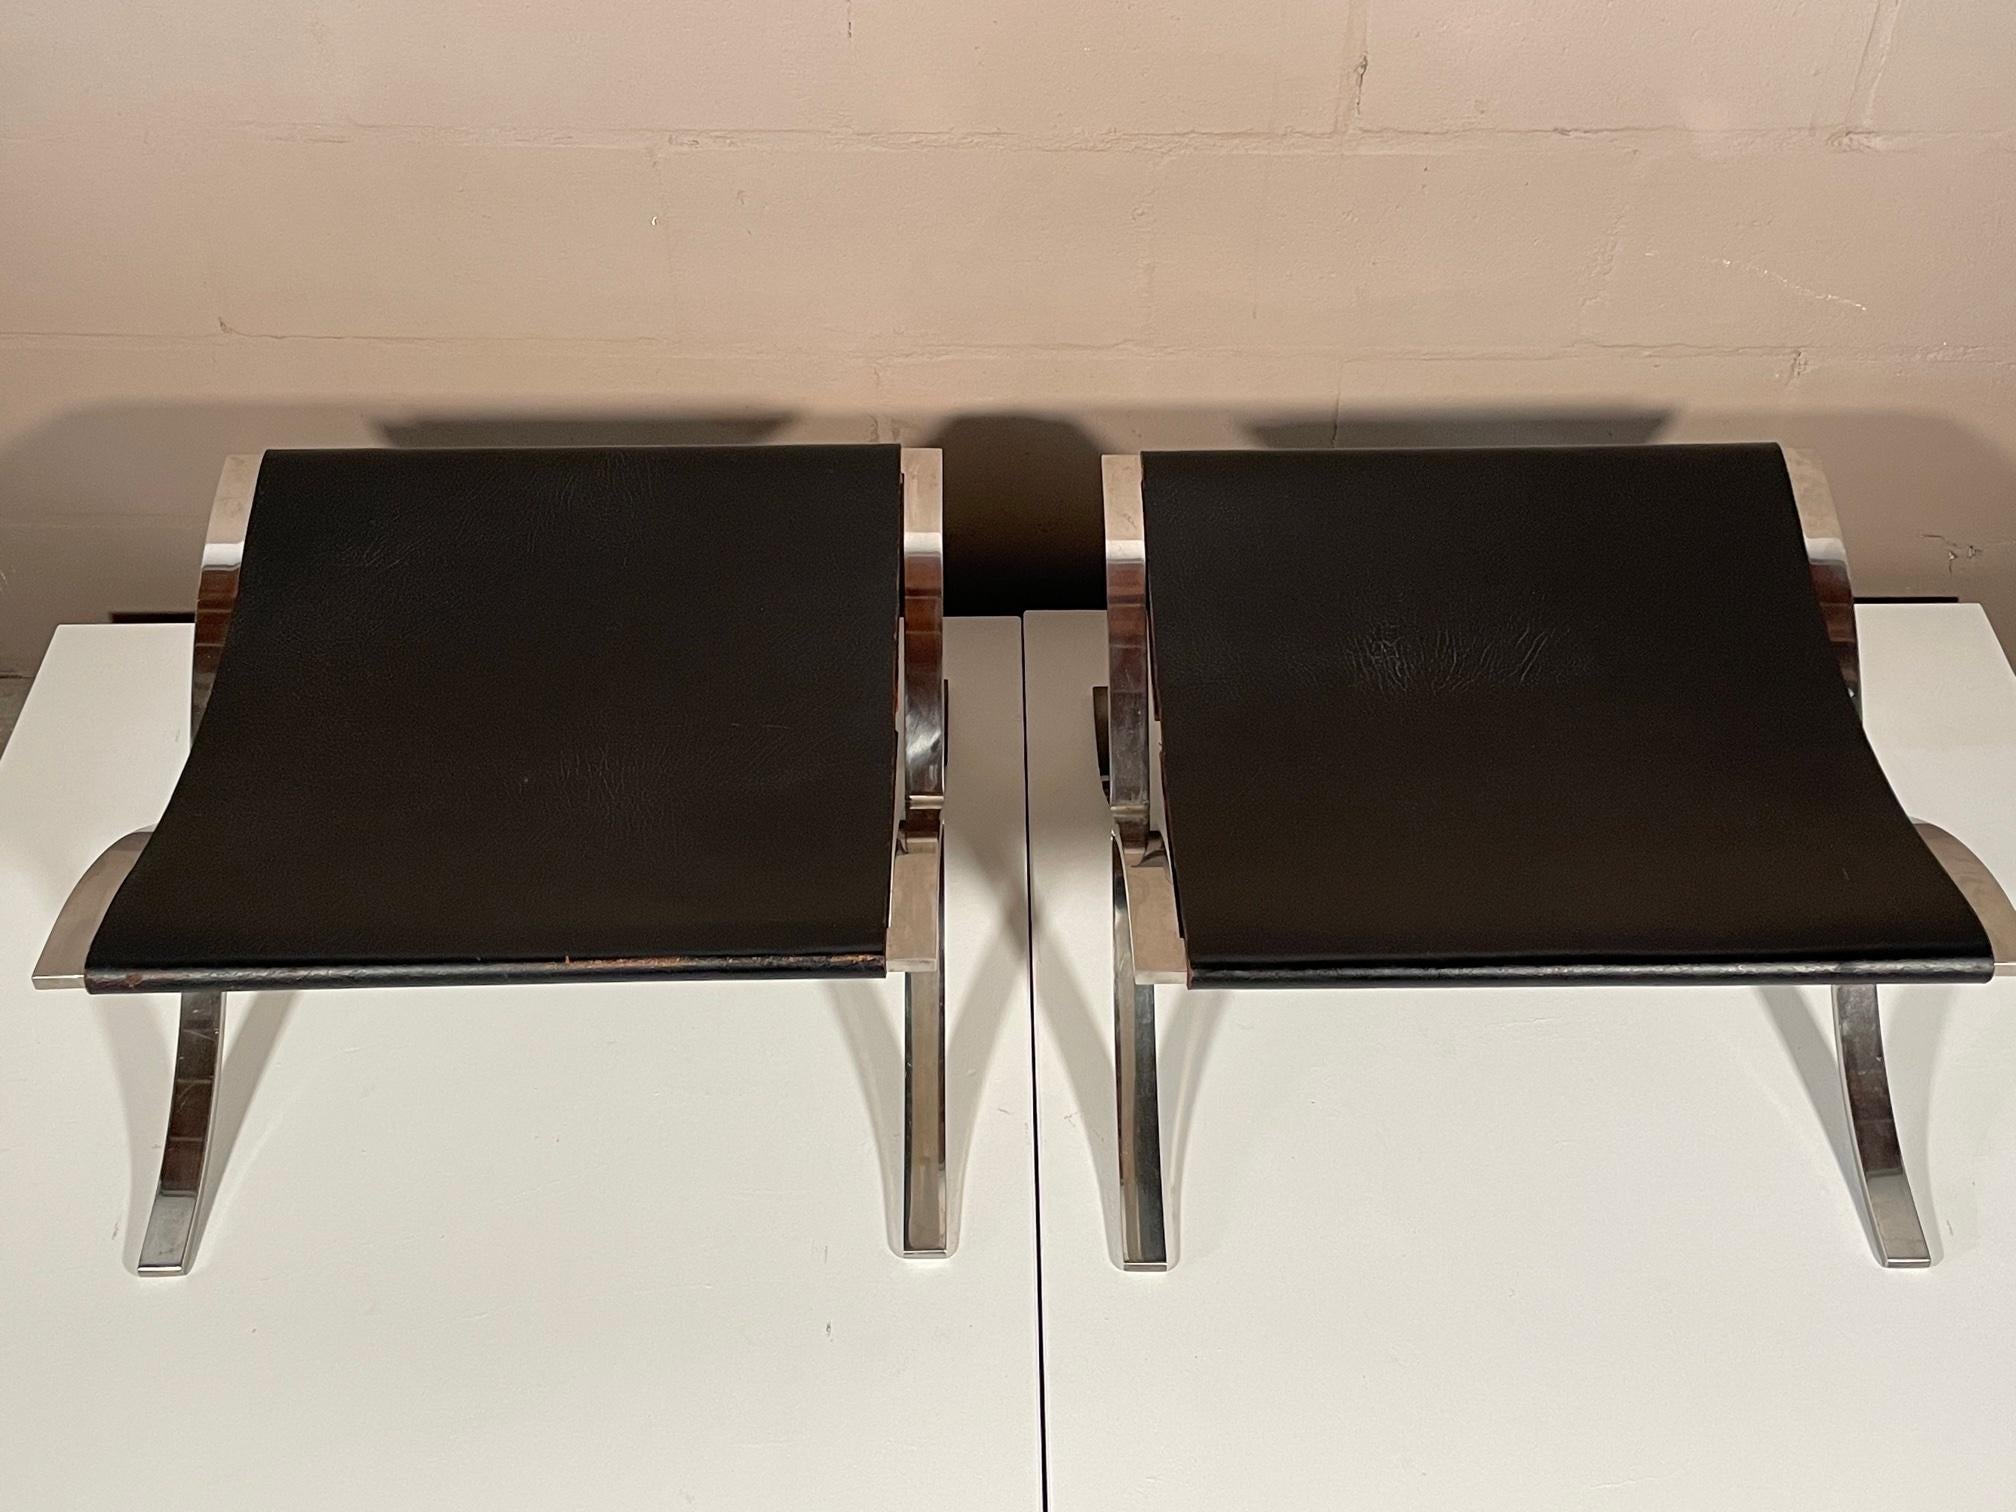 A pair of vintage stools designed by Mies Van Der Rohe, manufactured by Knoll ca' 1960's. Solid chromed stainless steel X bases and thick, original belting leather. Very good overall condition. These were primarily used as ottomans, foot stools or